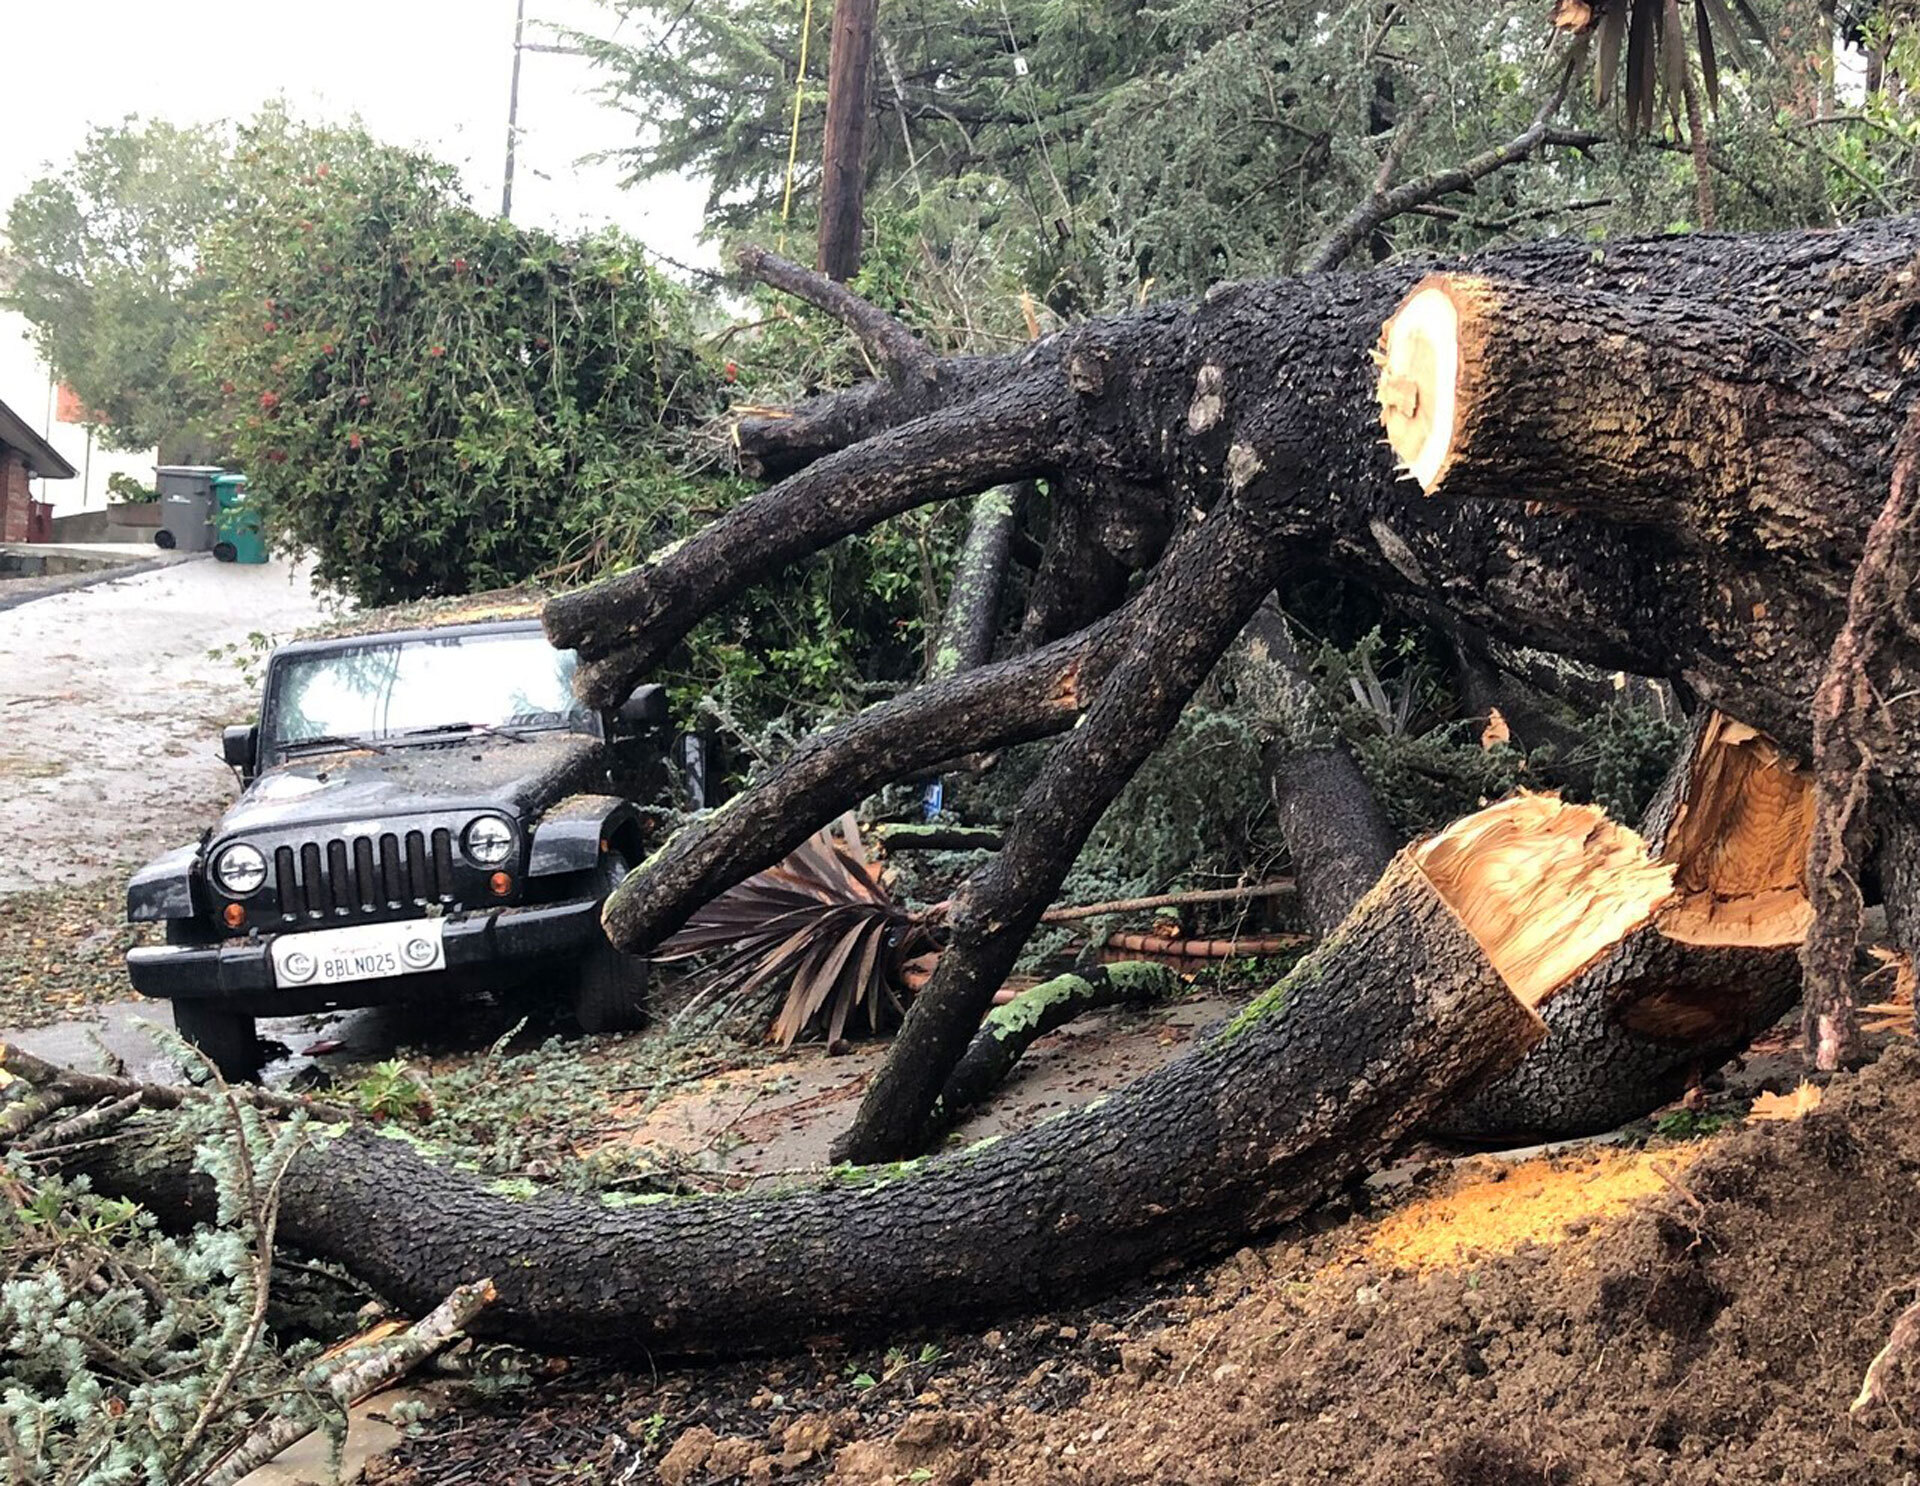 A gigantic tree with dark bark has fallen to the ground with thick branches busted open to reveal tan wooden insides. A black Jeep has taken on large fallen branches and debris to the left of the disaster as wet soil and muddy puddles surround the area.